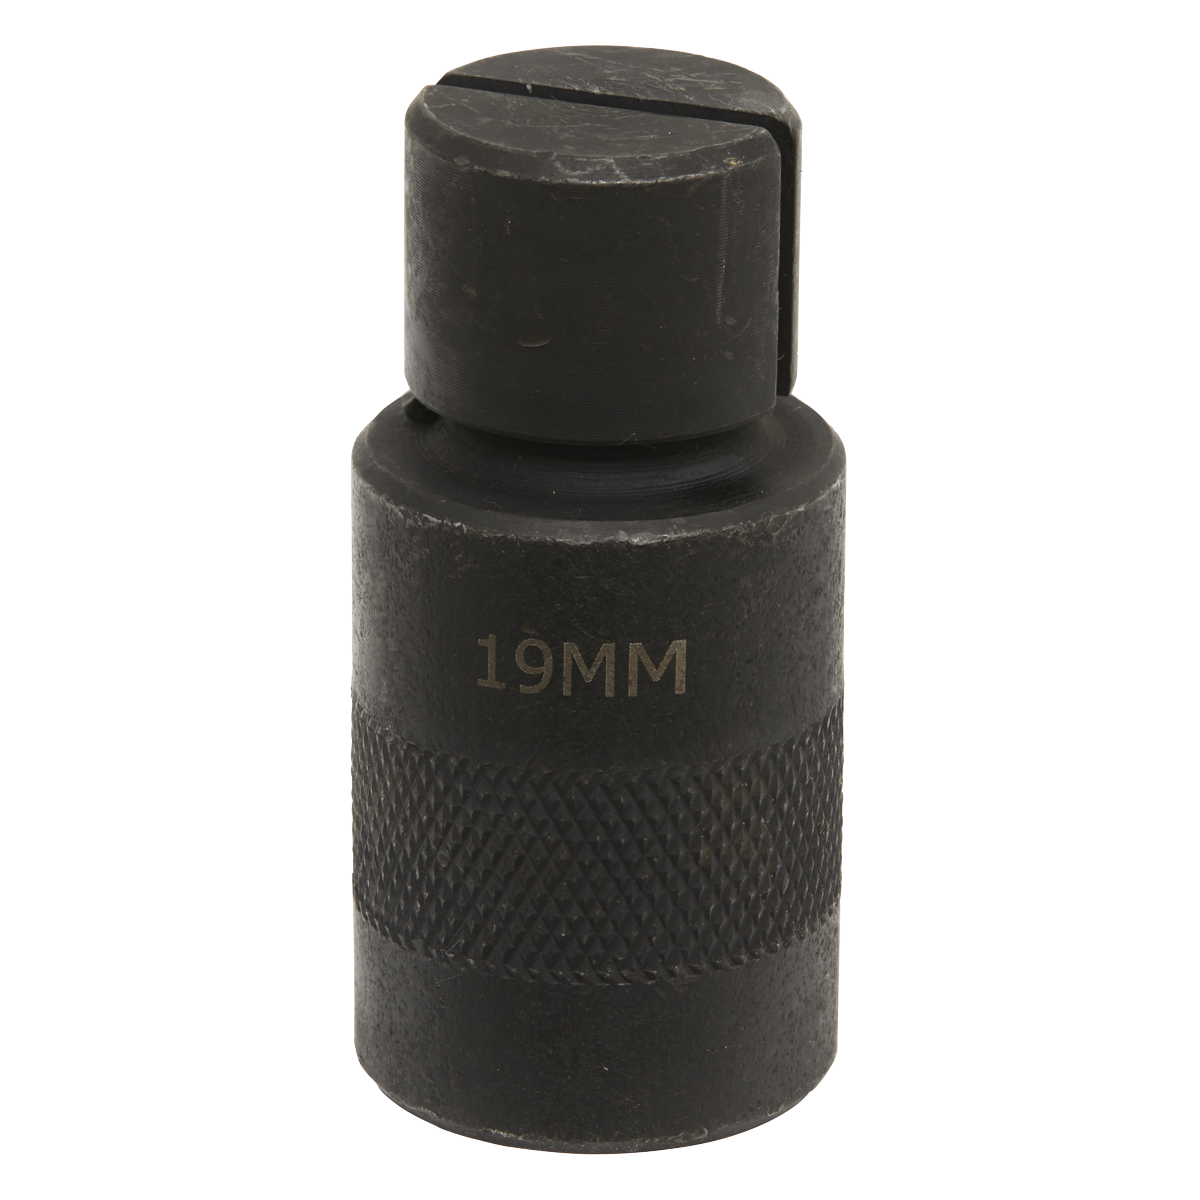 Replacement Collet for MS062 Ø19mm